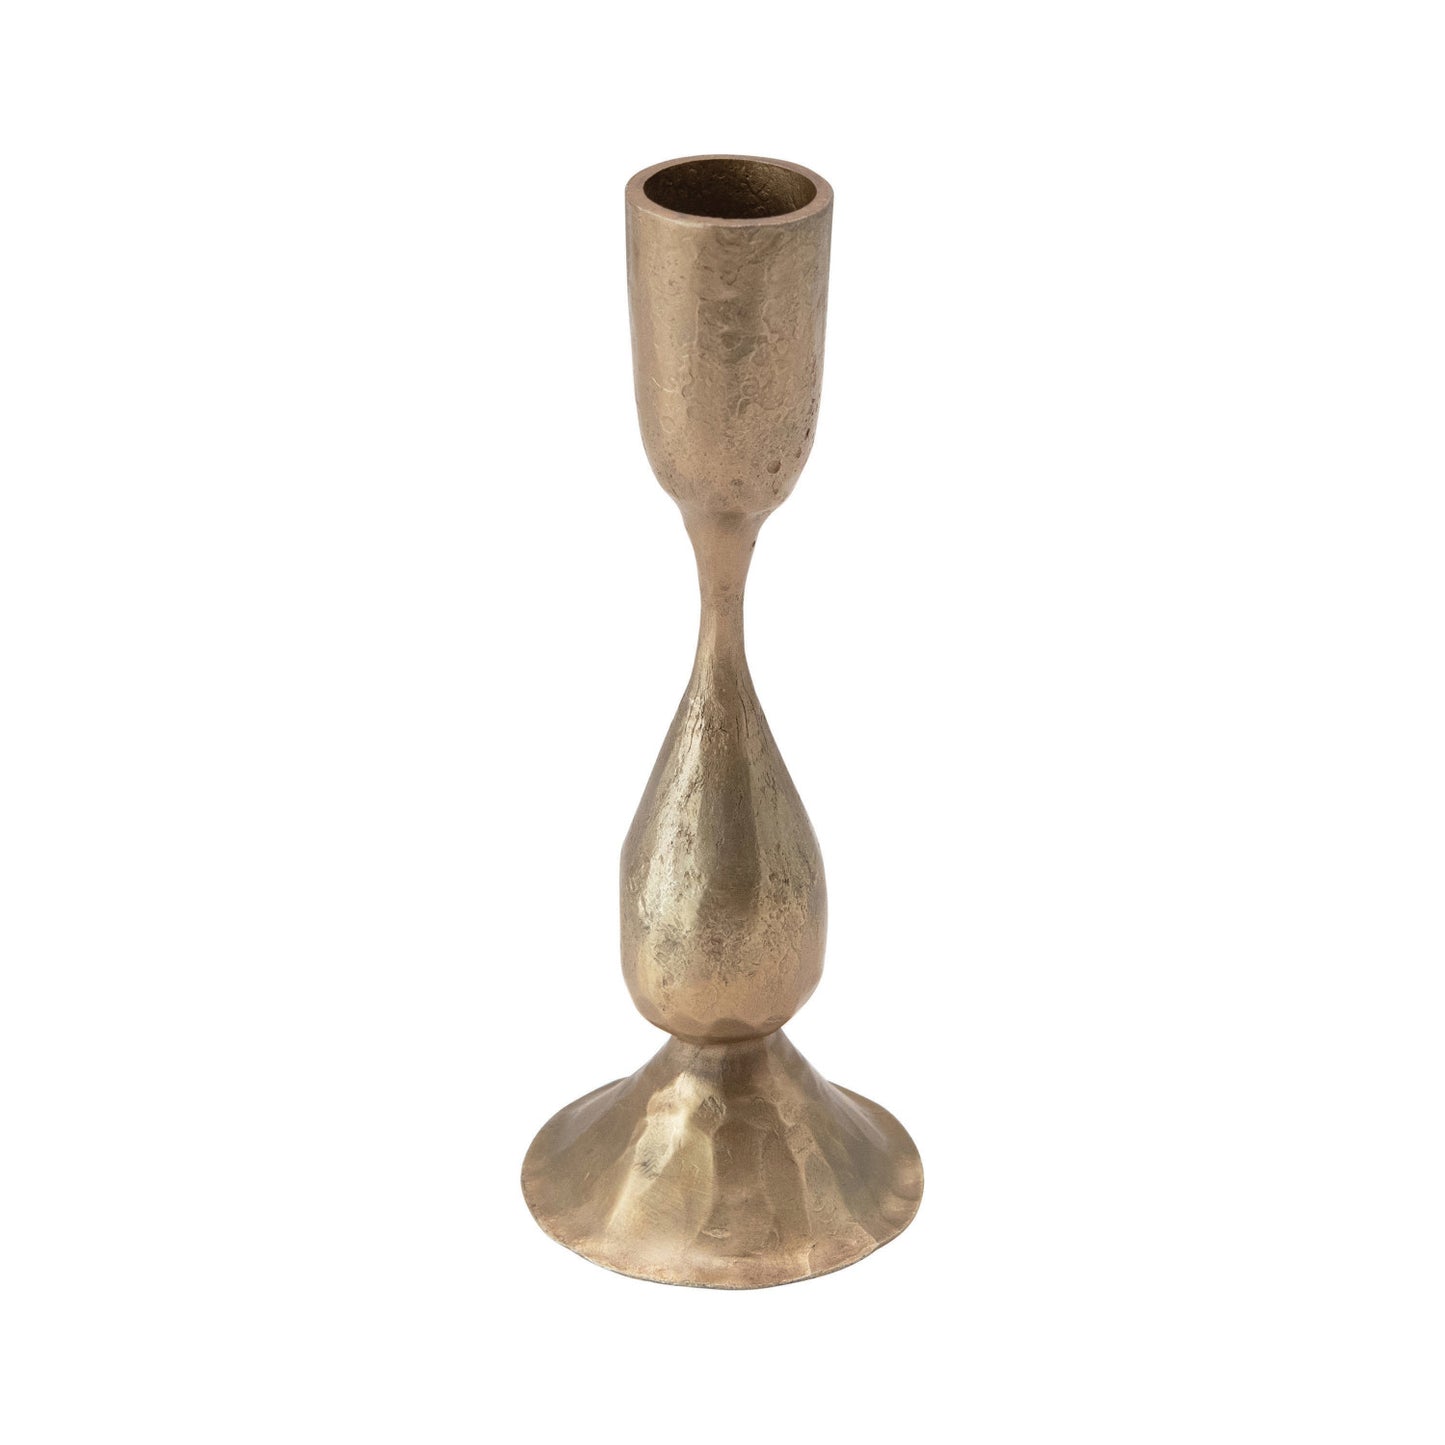 Hand-Forged Metal Taper Holder with Antique Finish - Shop Wild Ivy